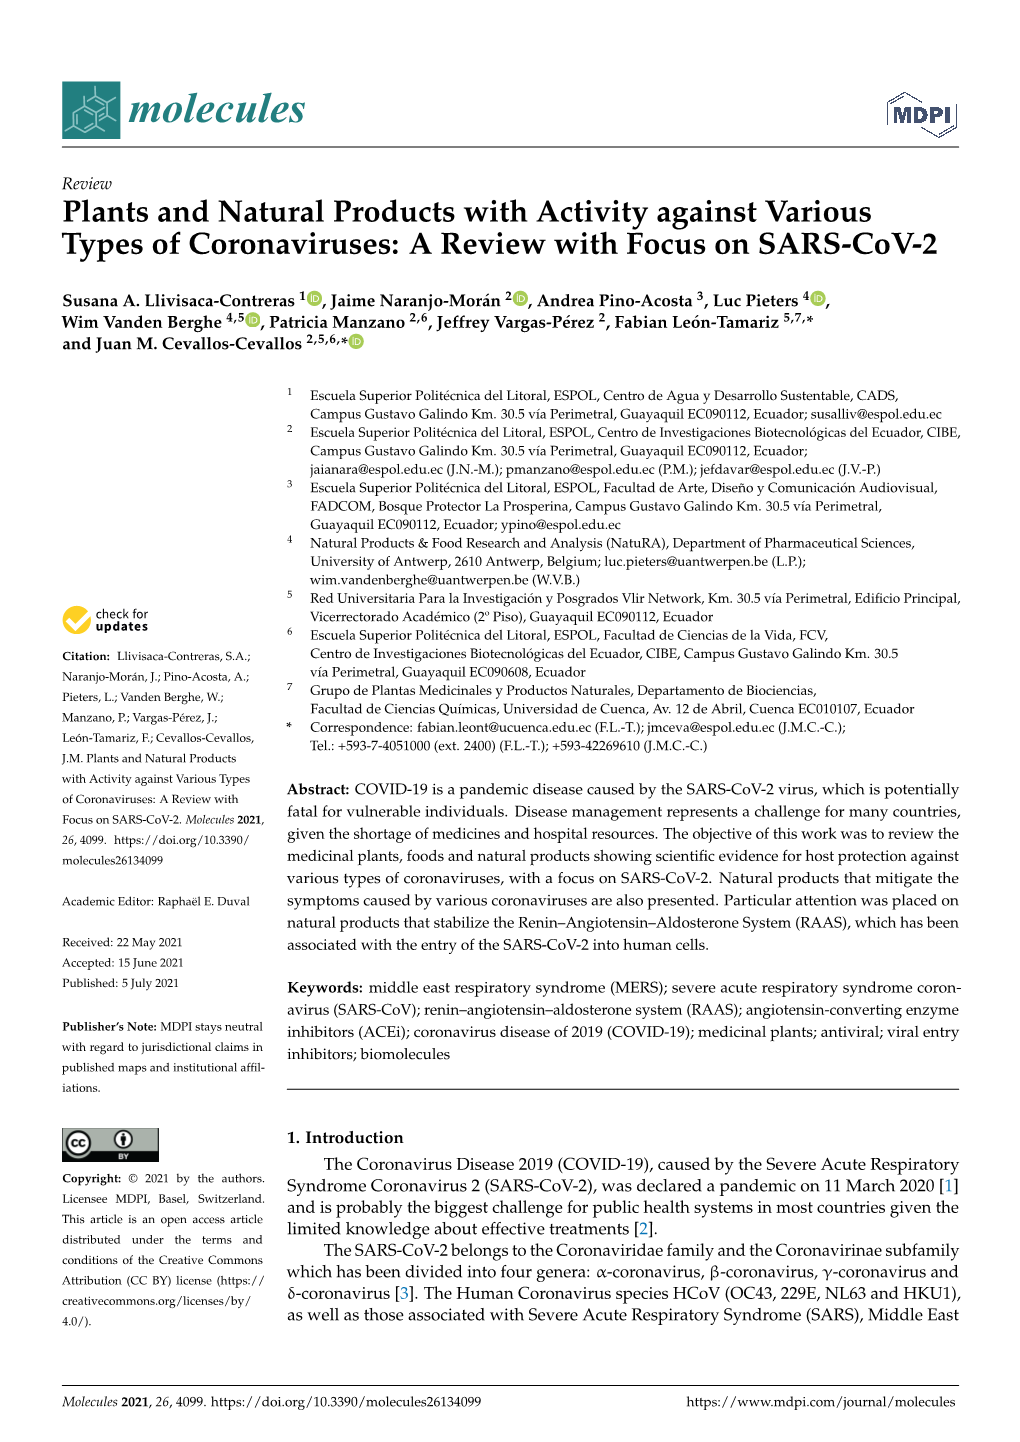 A Review with Focus on SARS-Cov-2